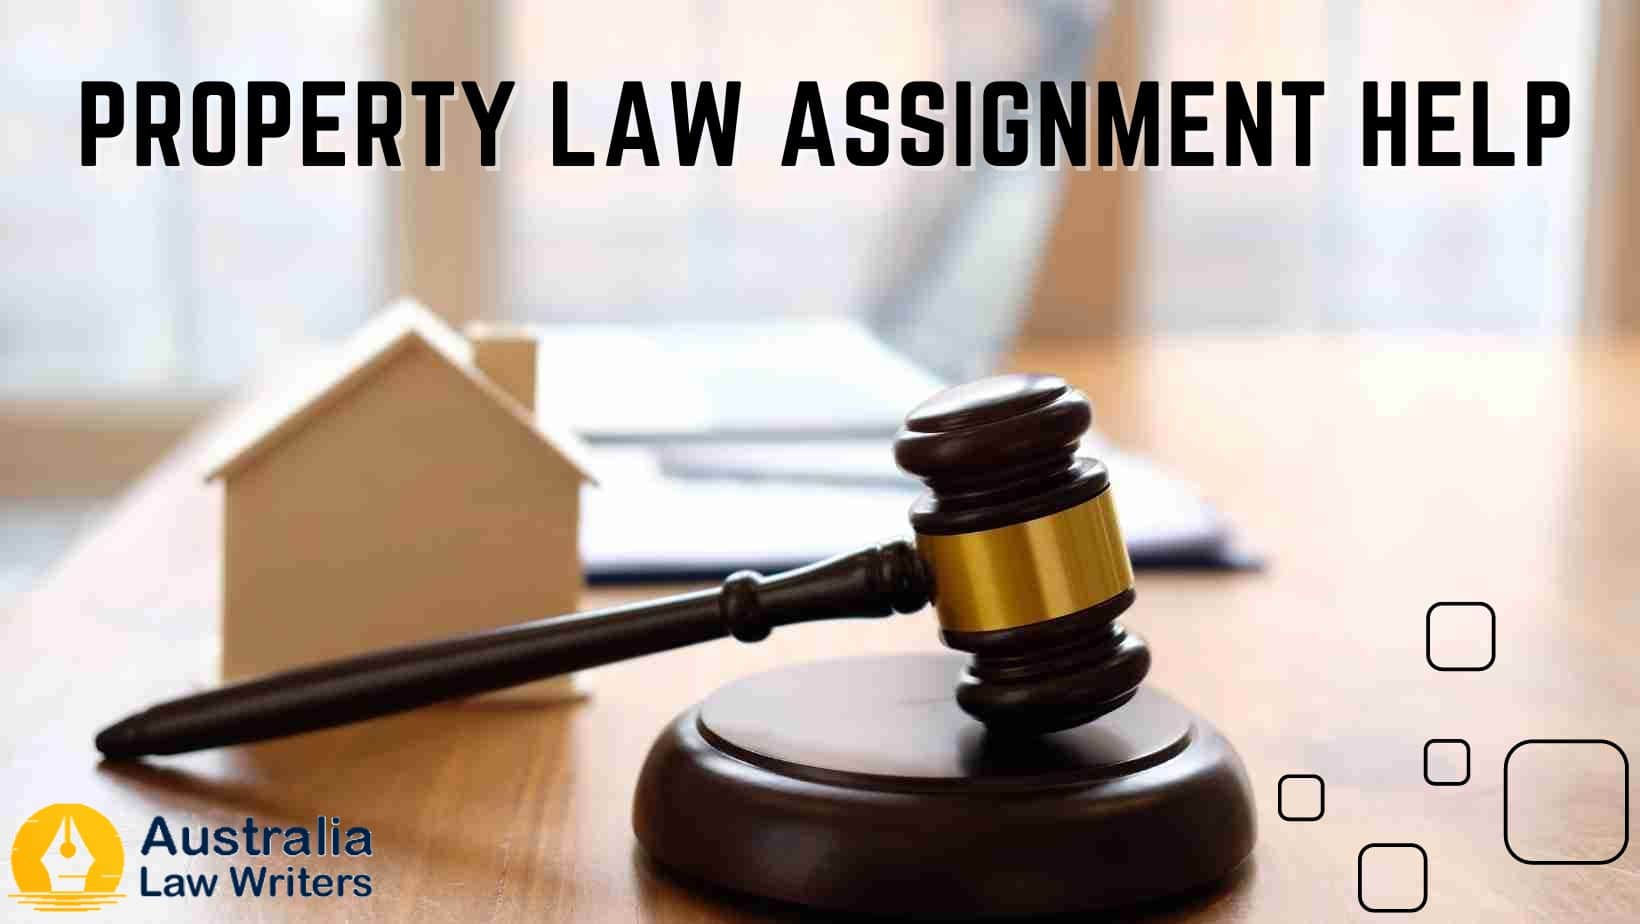 Get Expert Property Law Assignment help in Australia - Hire Us Today